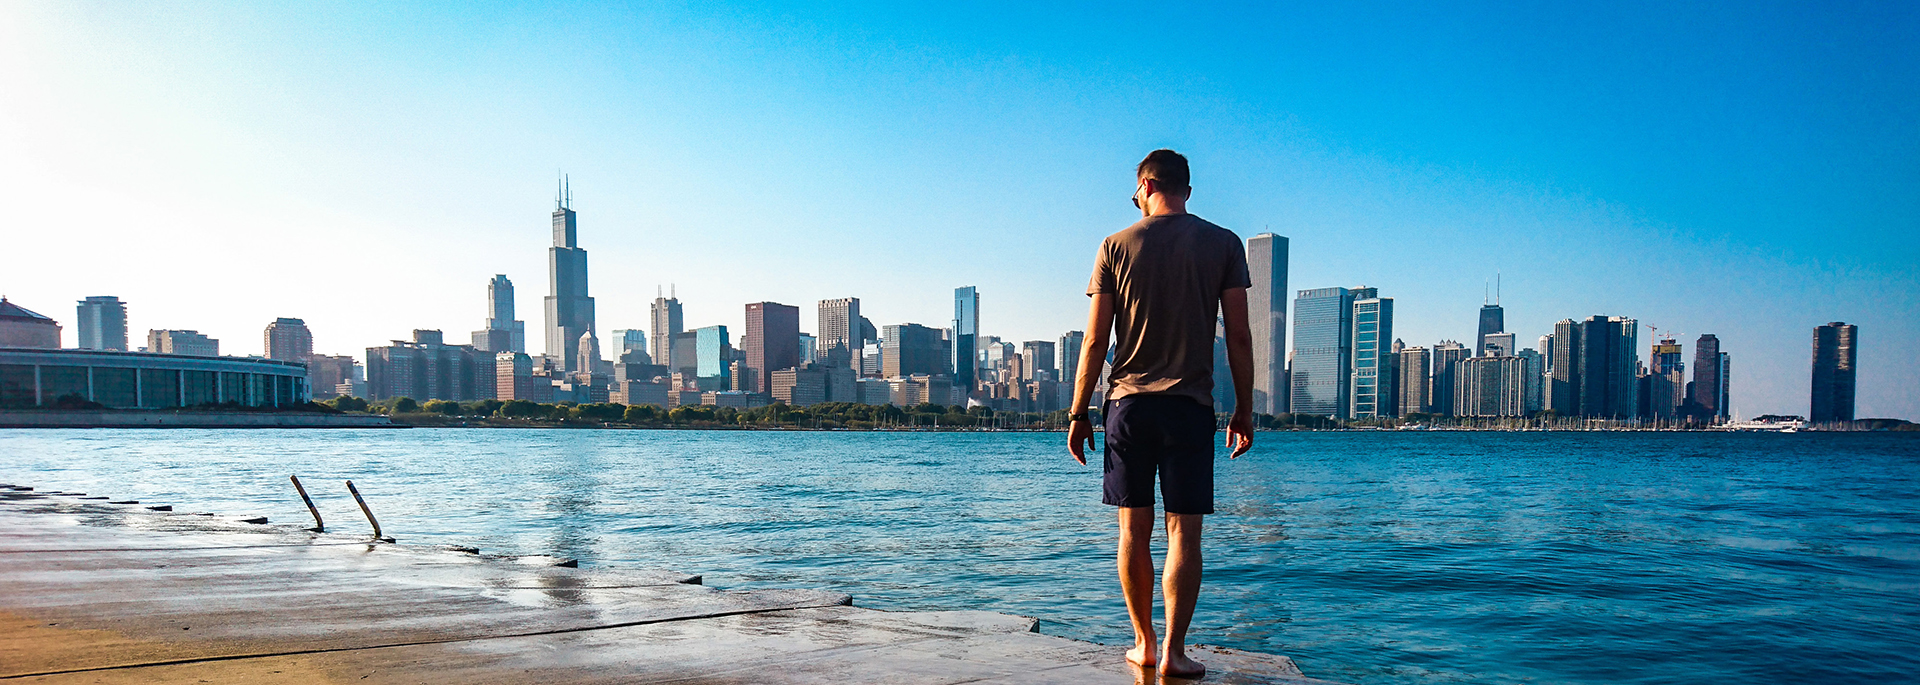 man walking along edge of water with chicago skyline in view